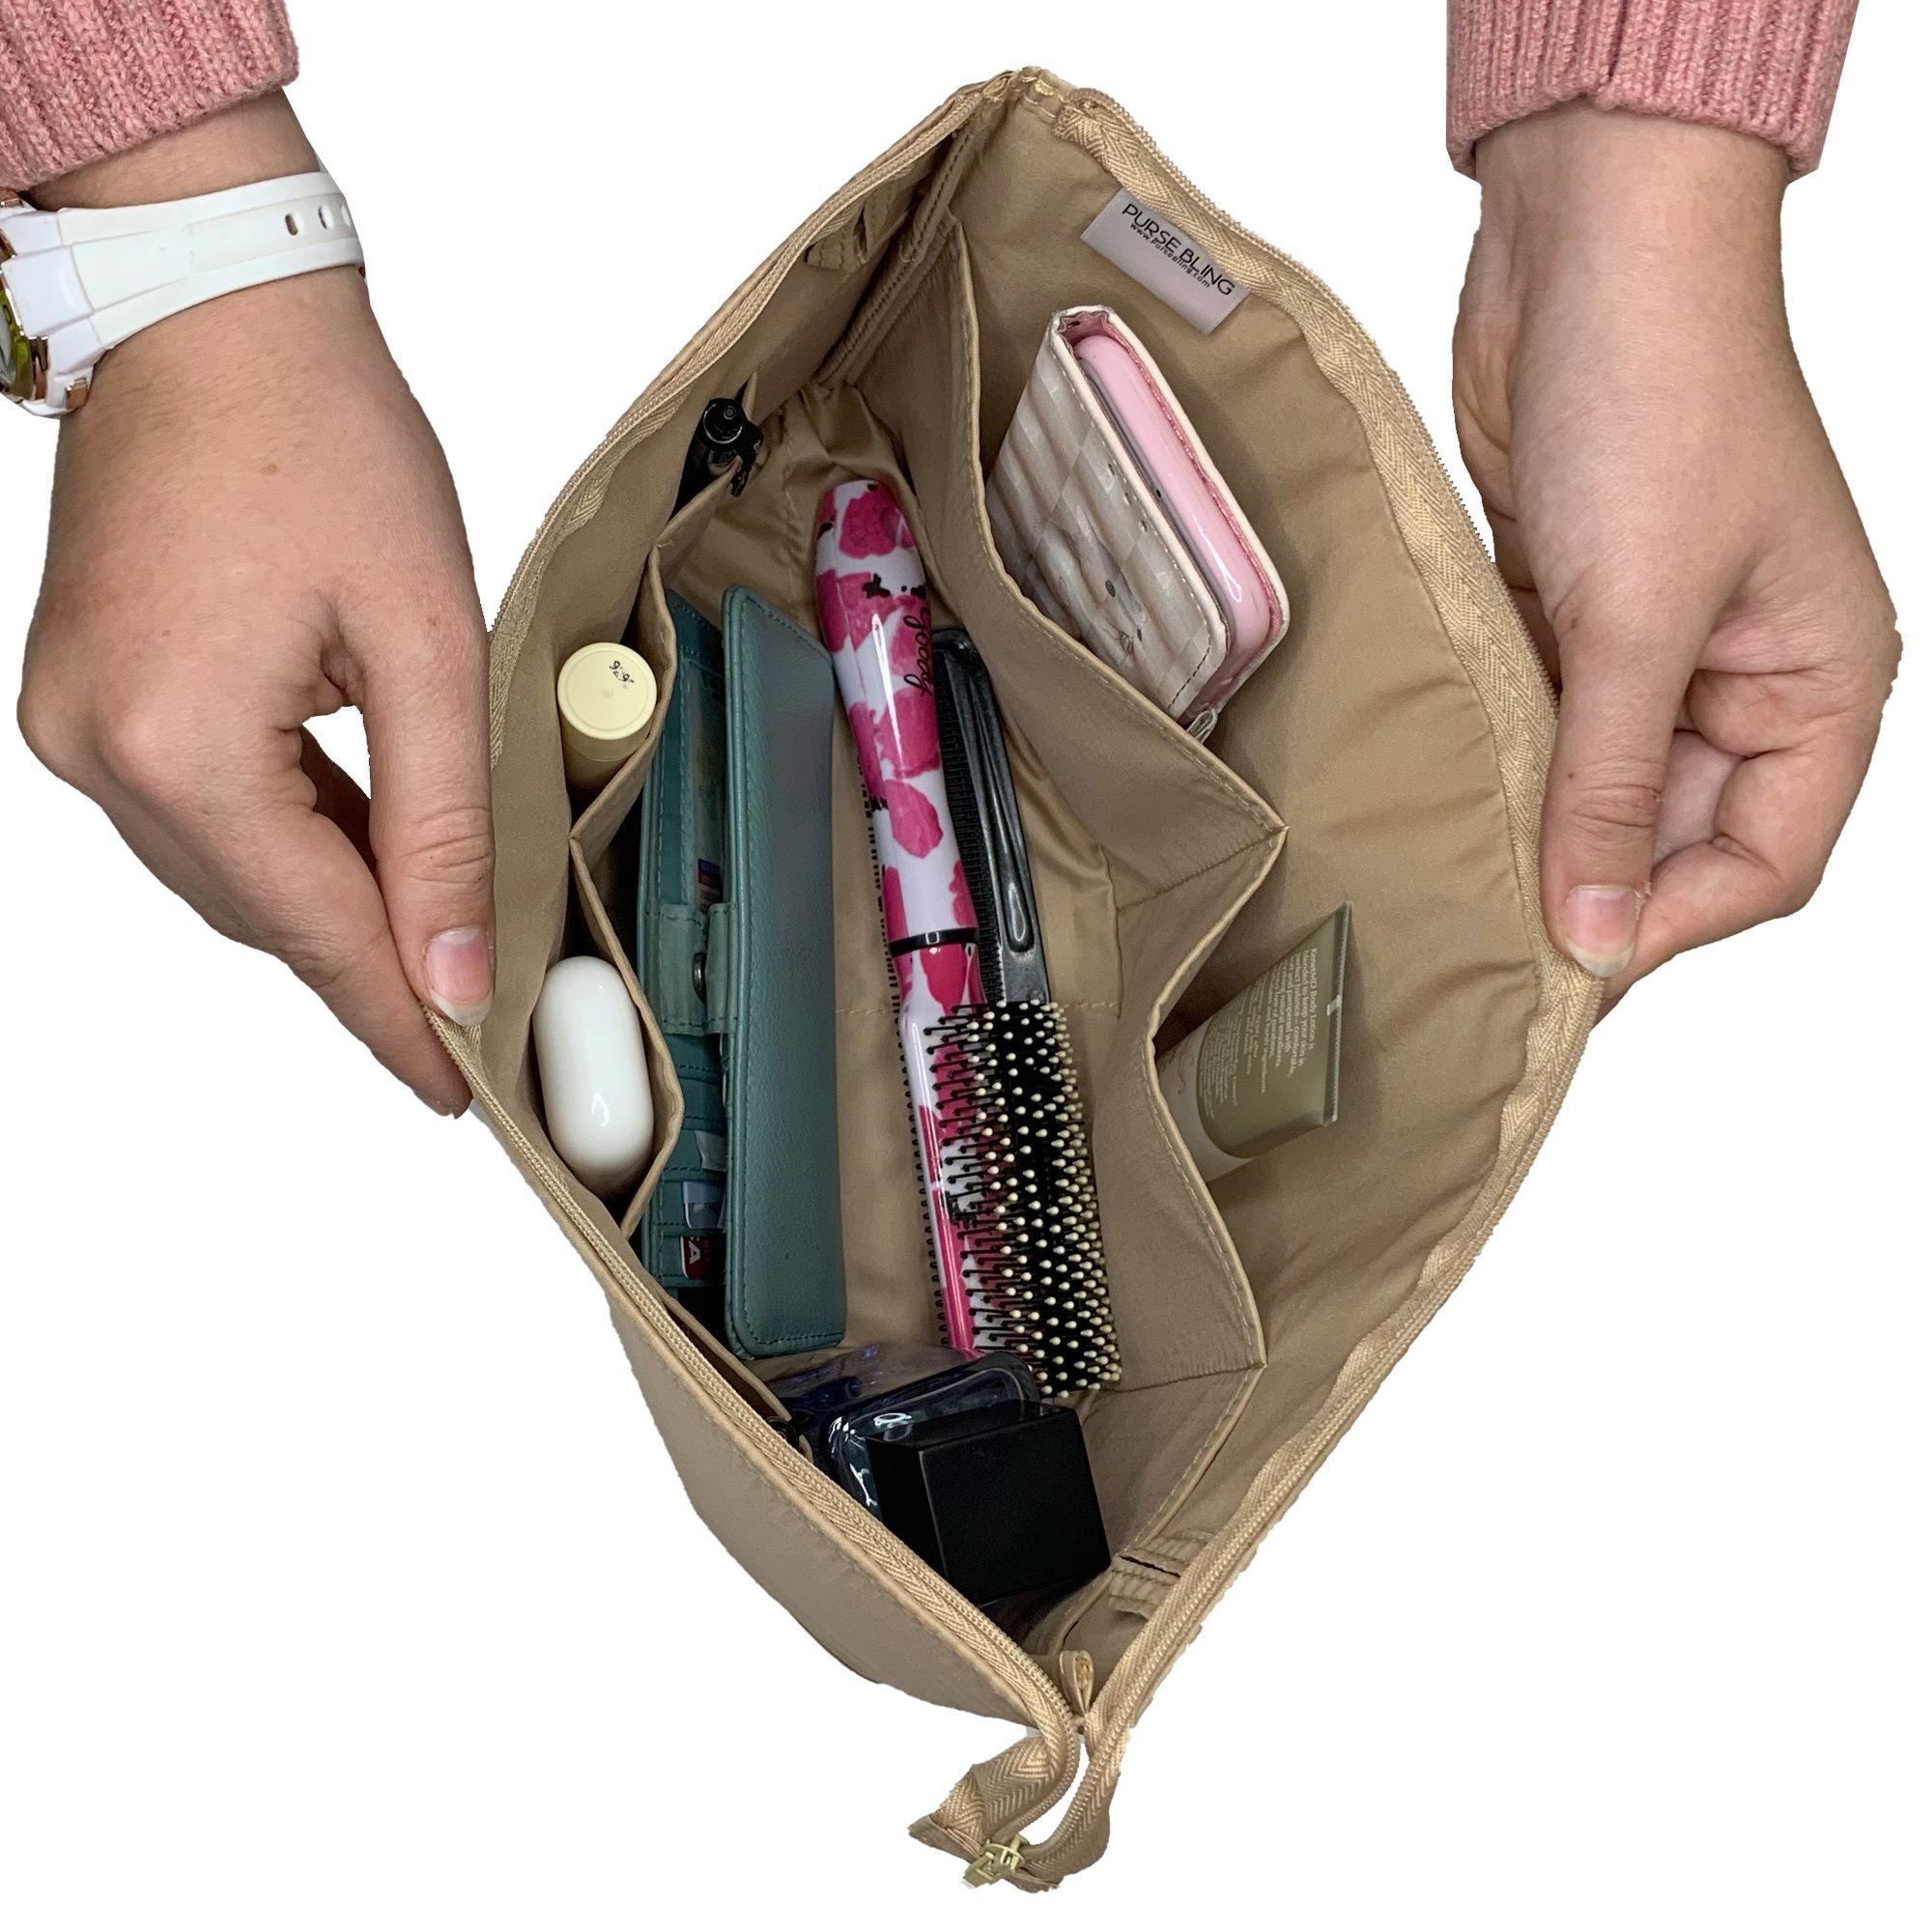 No more messy bag!' This clever, bestselling purse organizer just dropped  to $10